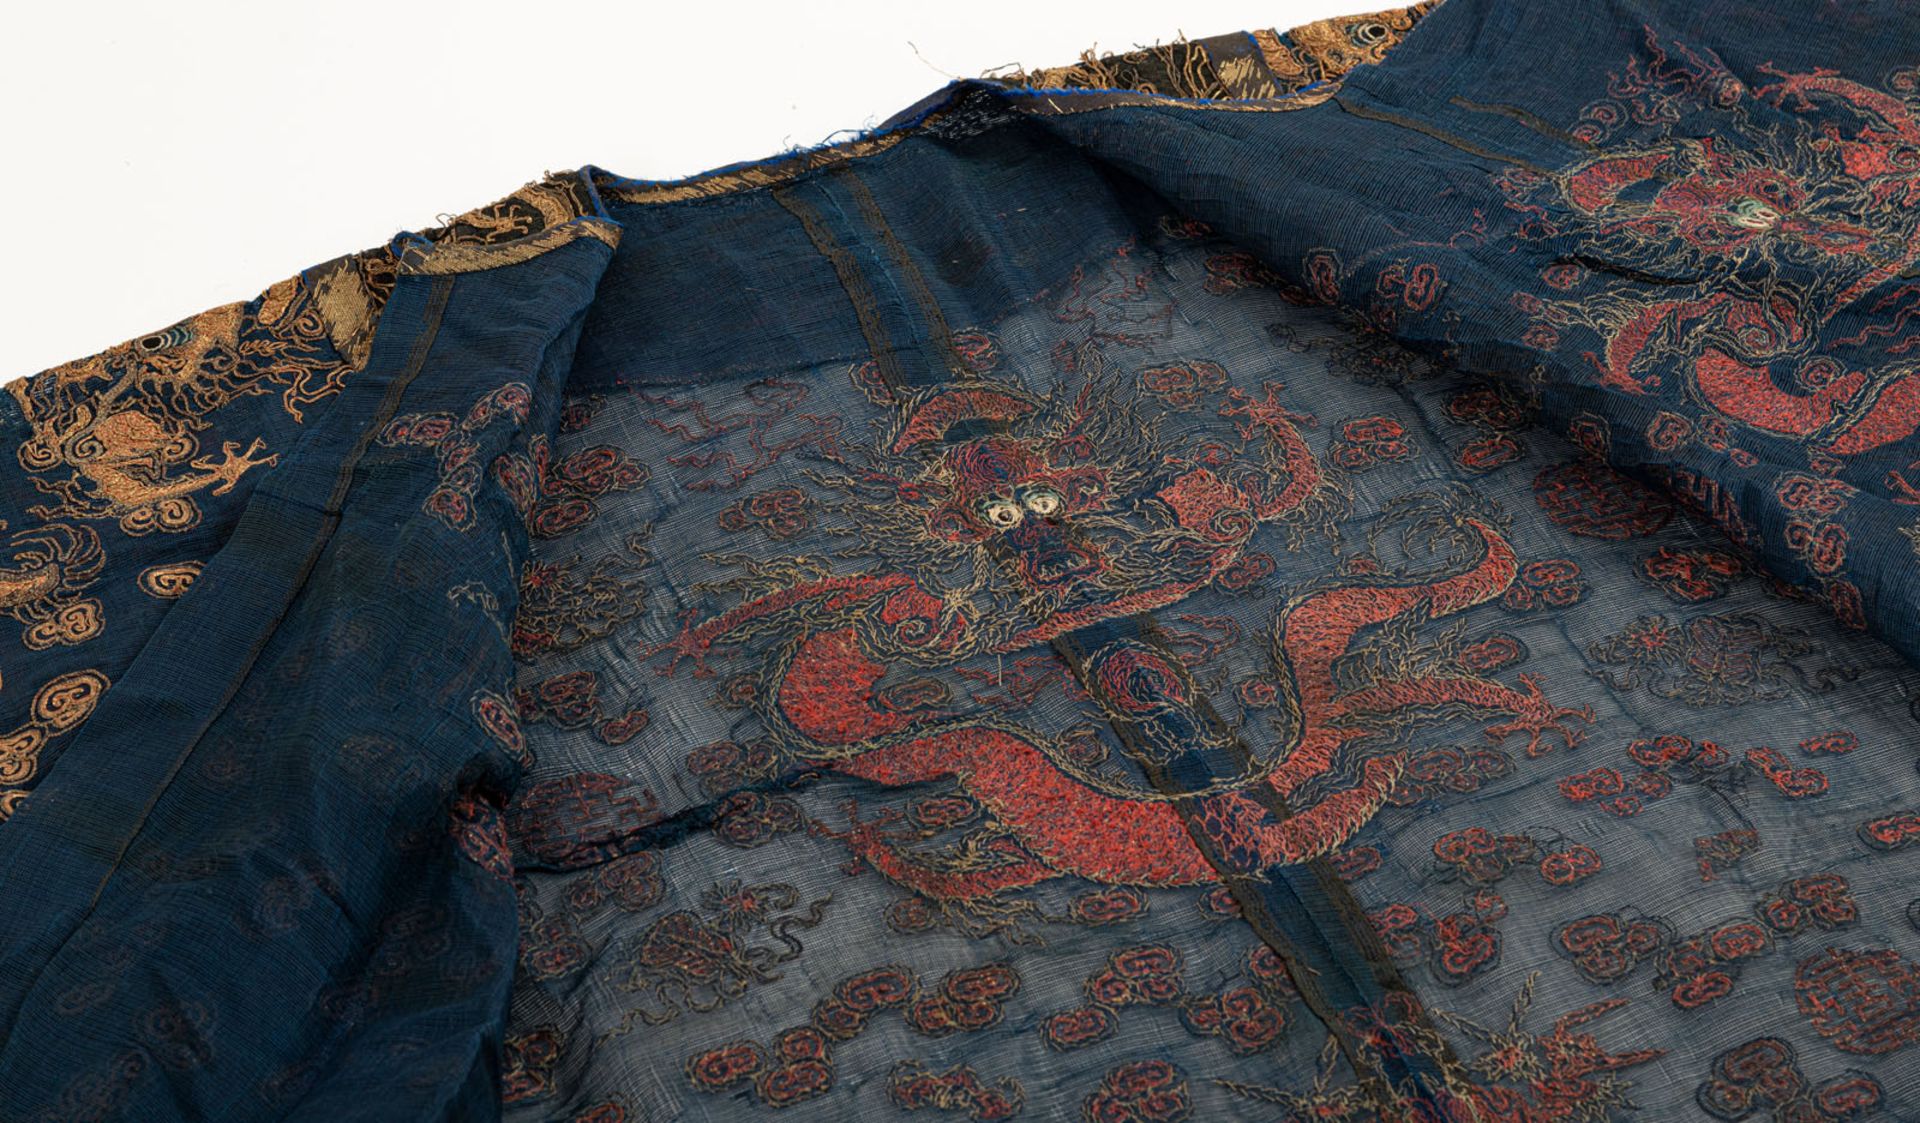 NAVY BLUE DRAGON ROBE (JIFU) IN SHA AND GOLD EMBROIDERY FOR A GENTLEMAN - Image 7 of 8